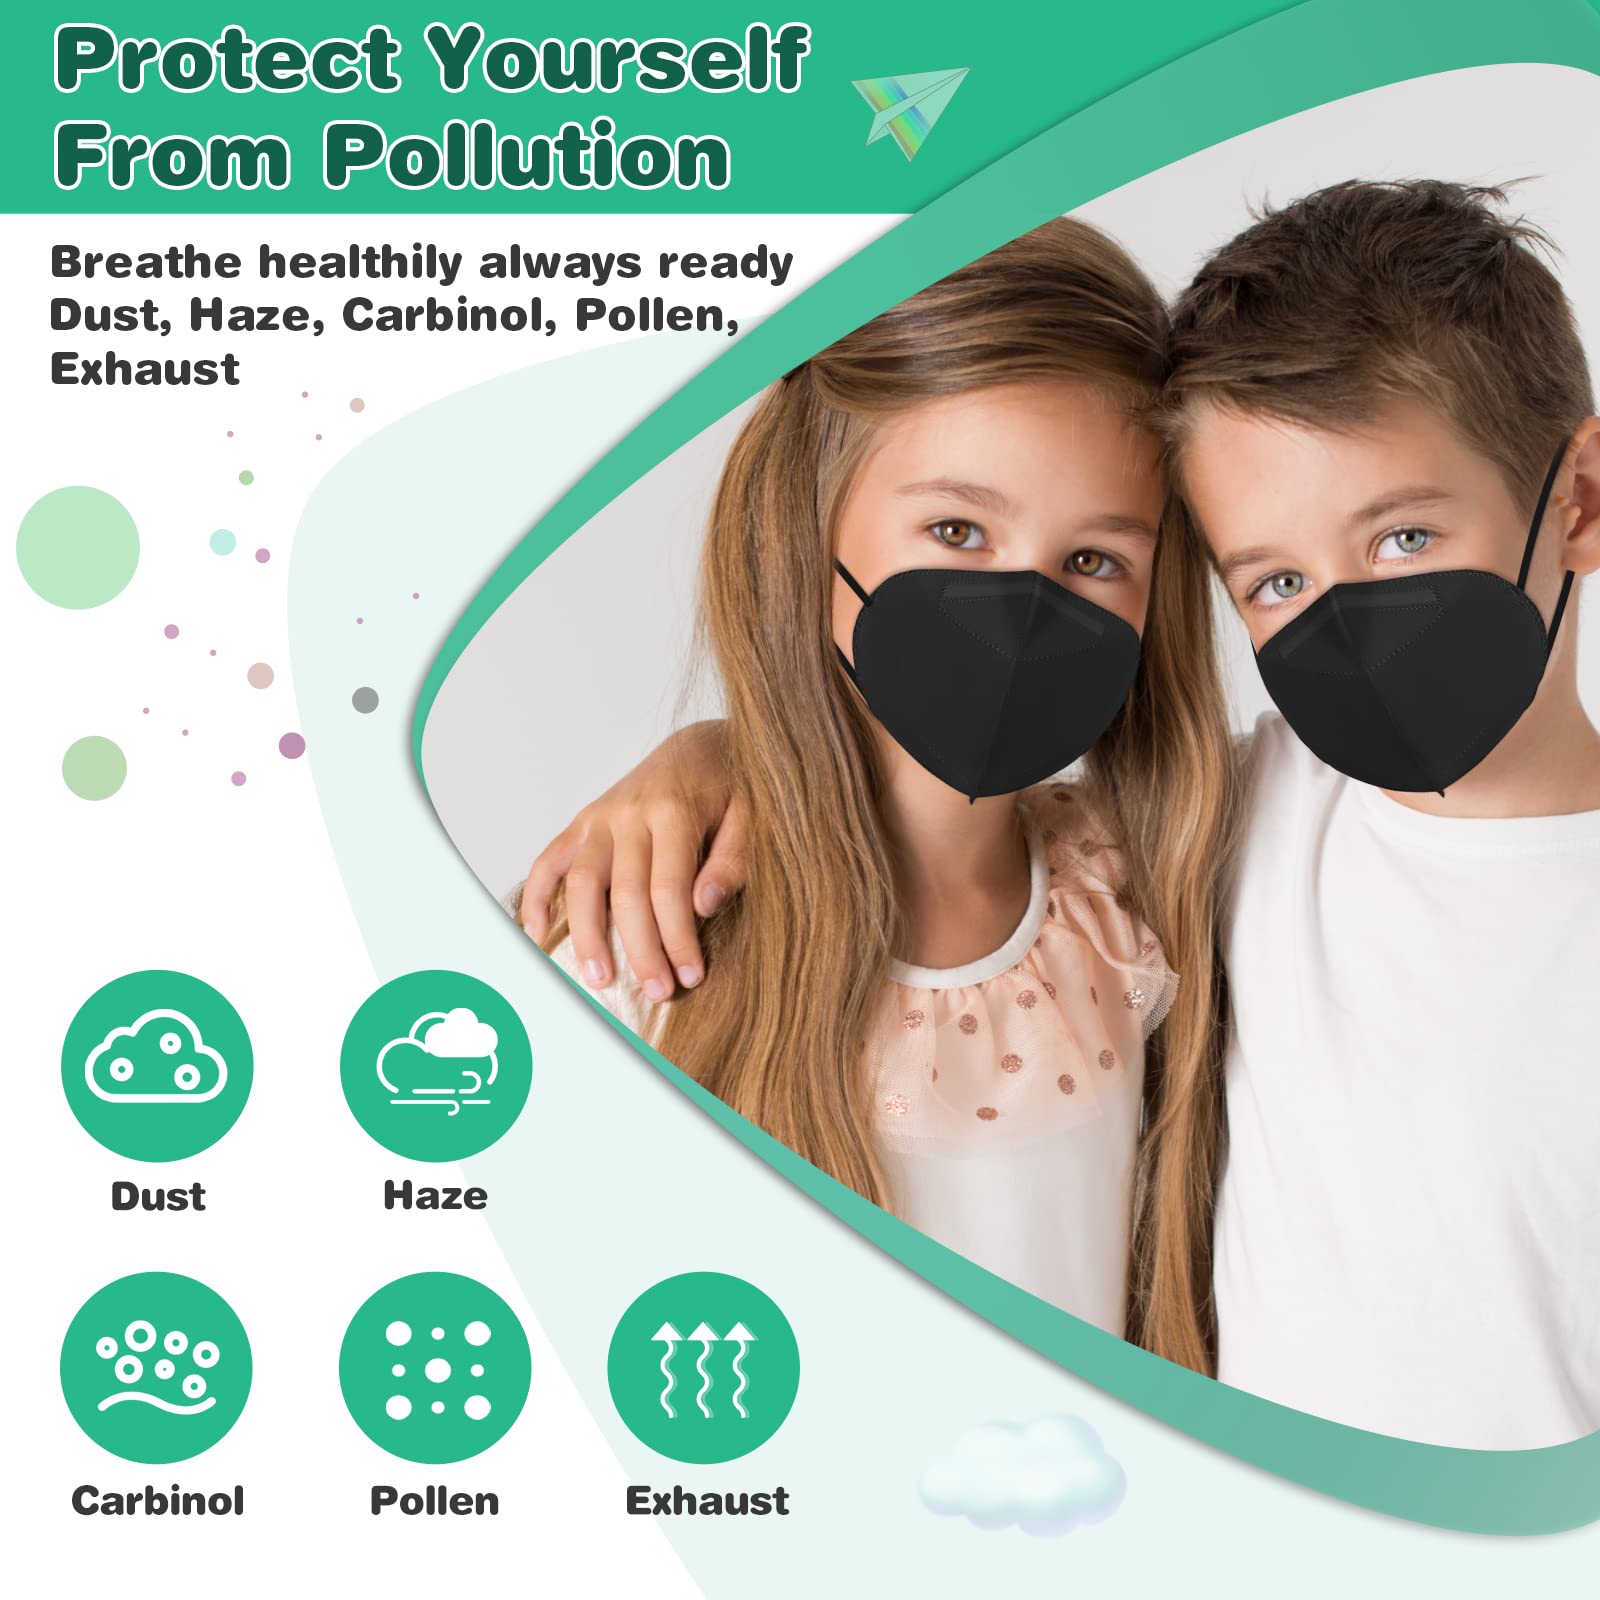 XDX Kids KN95 Masks for Children, 25 Pack Individually Wrapped Black Disposable Face Masks, 5 Layers KN95 Mask for Kids, Breathable & Comfortable, Filter Efficiency ≥95%